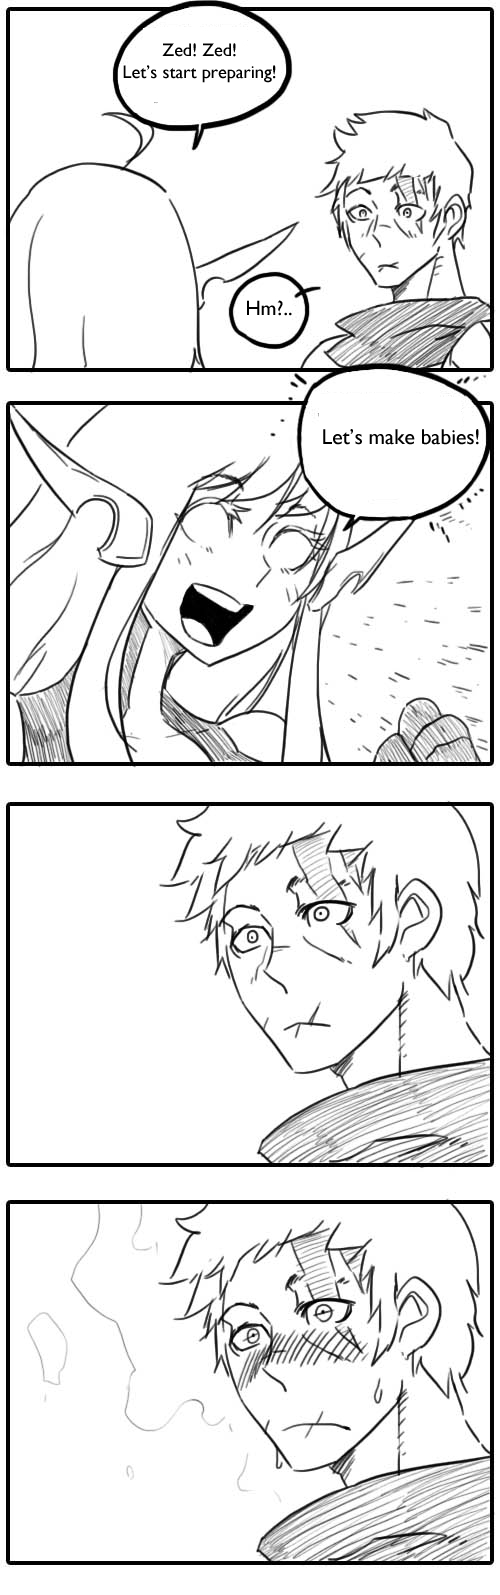 League of Legends Syndra & Zed's Everyday Life (Doujinshi) Vol. 1 Ch. 18 Extras